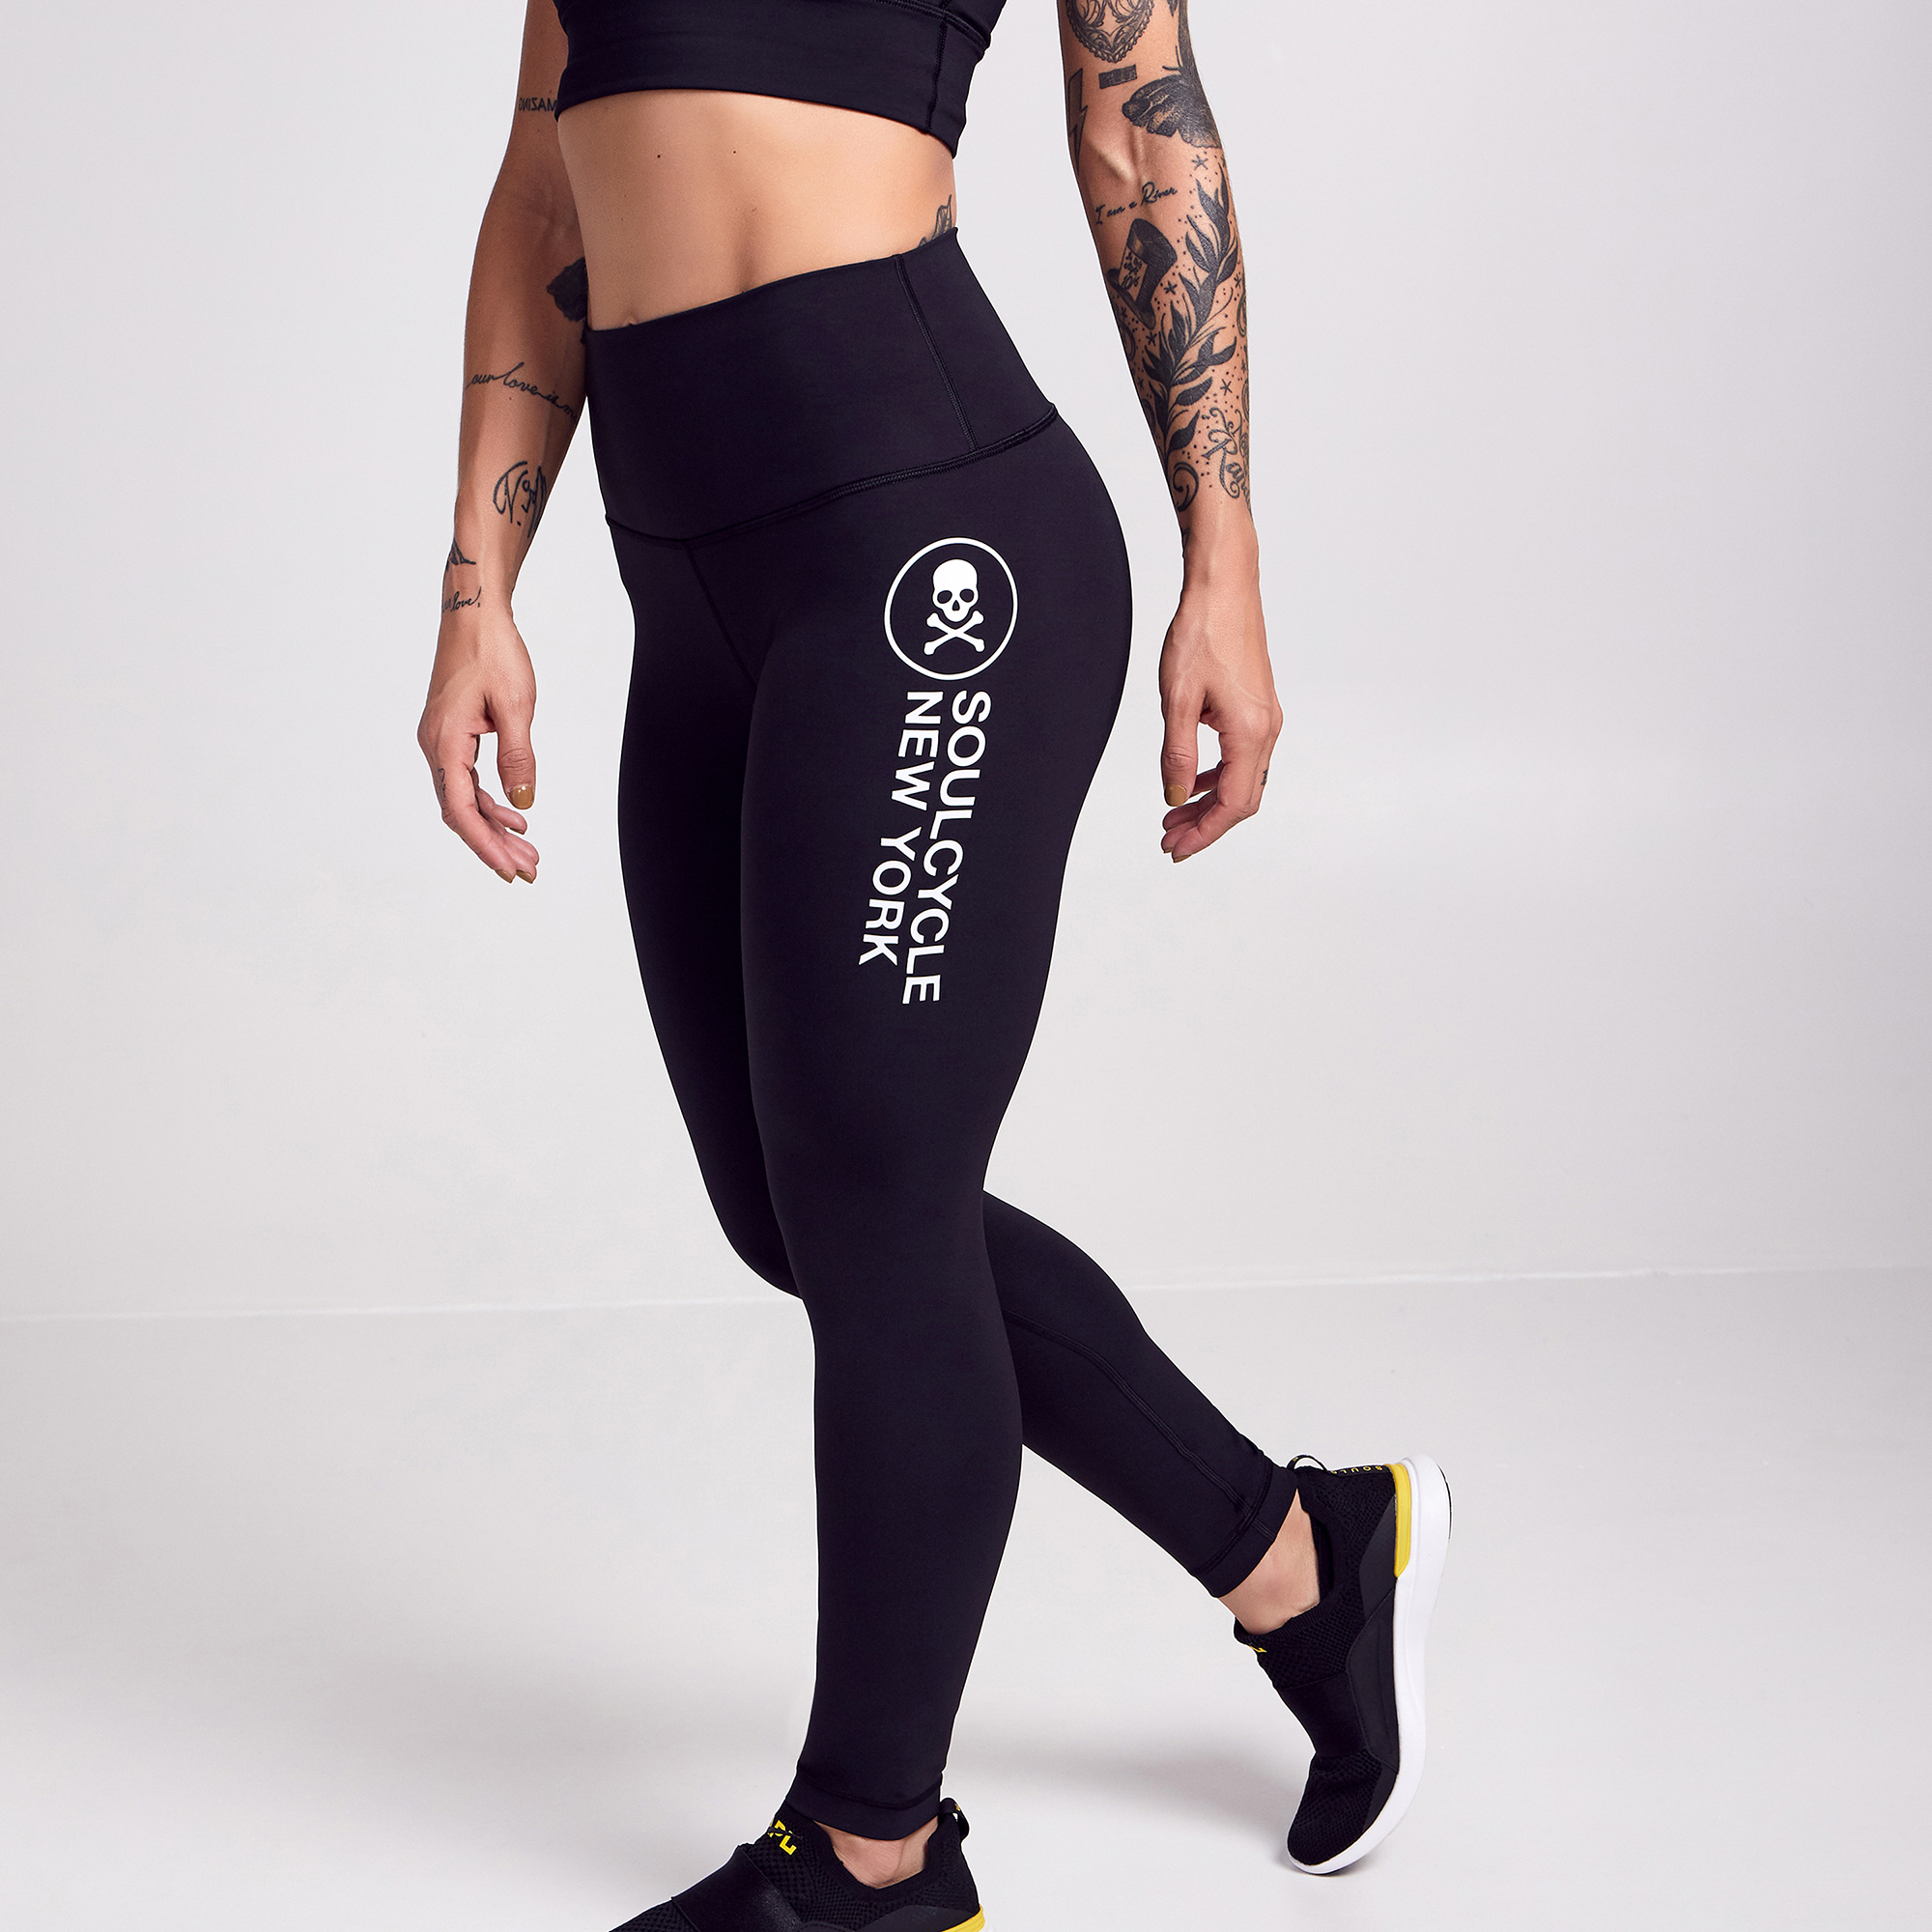 Lulu Leggings For Working Out 2021